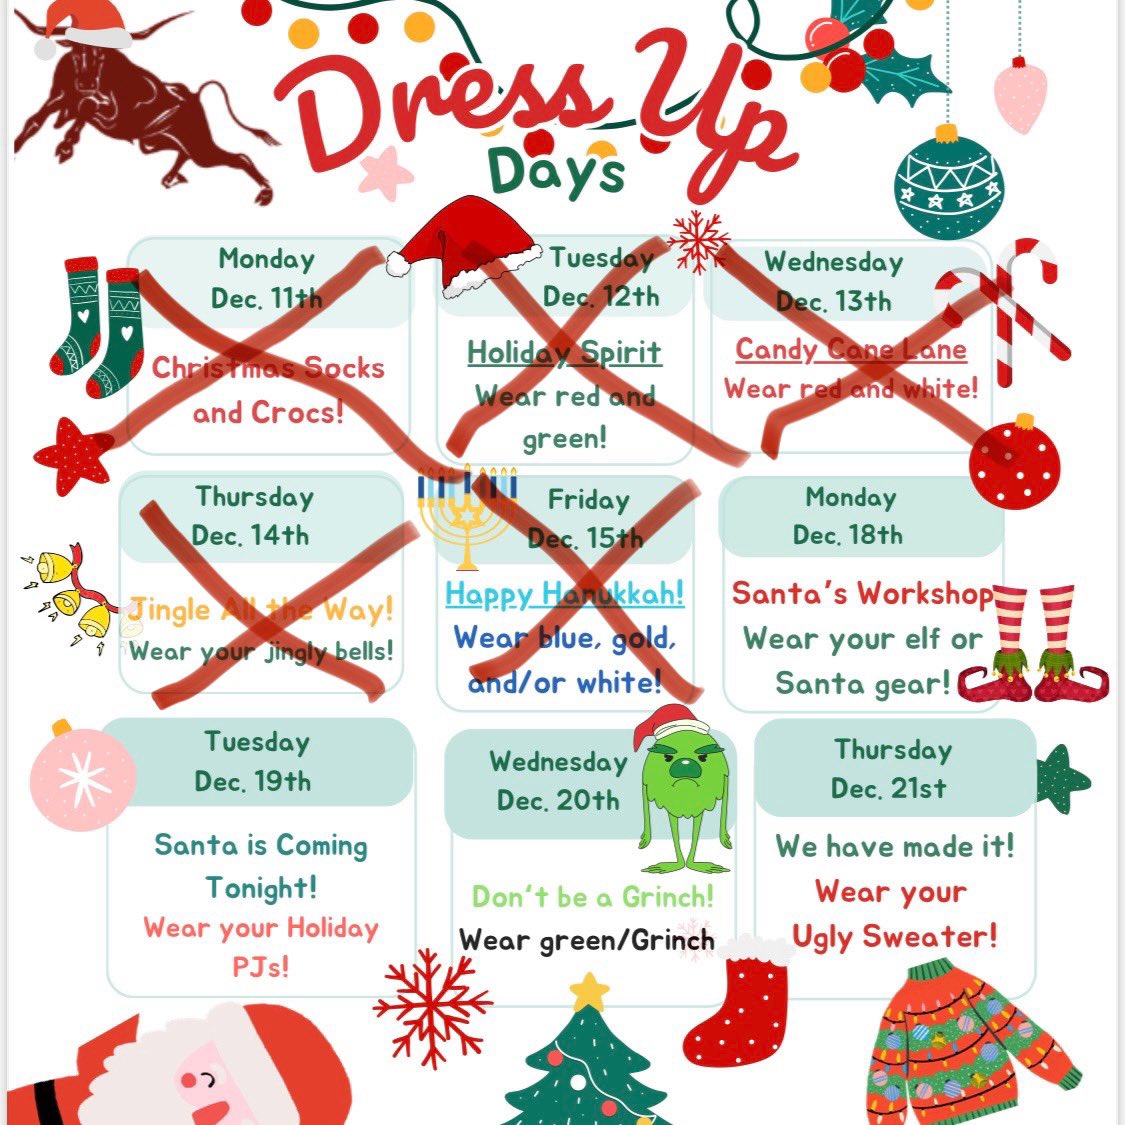 4 school days left! Get in the holiday spirit & wear your holiday gear! Check out the rest of the calendar!🎄🎅☃️